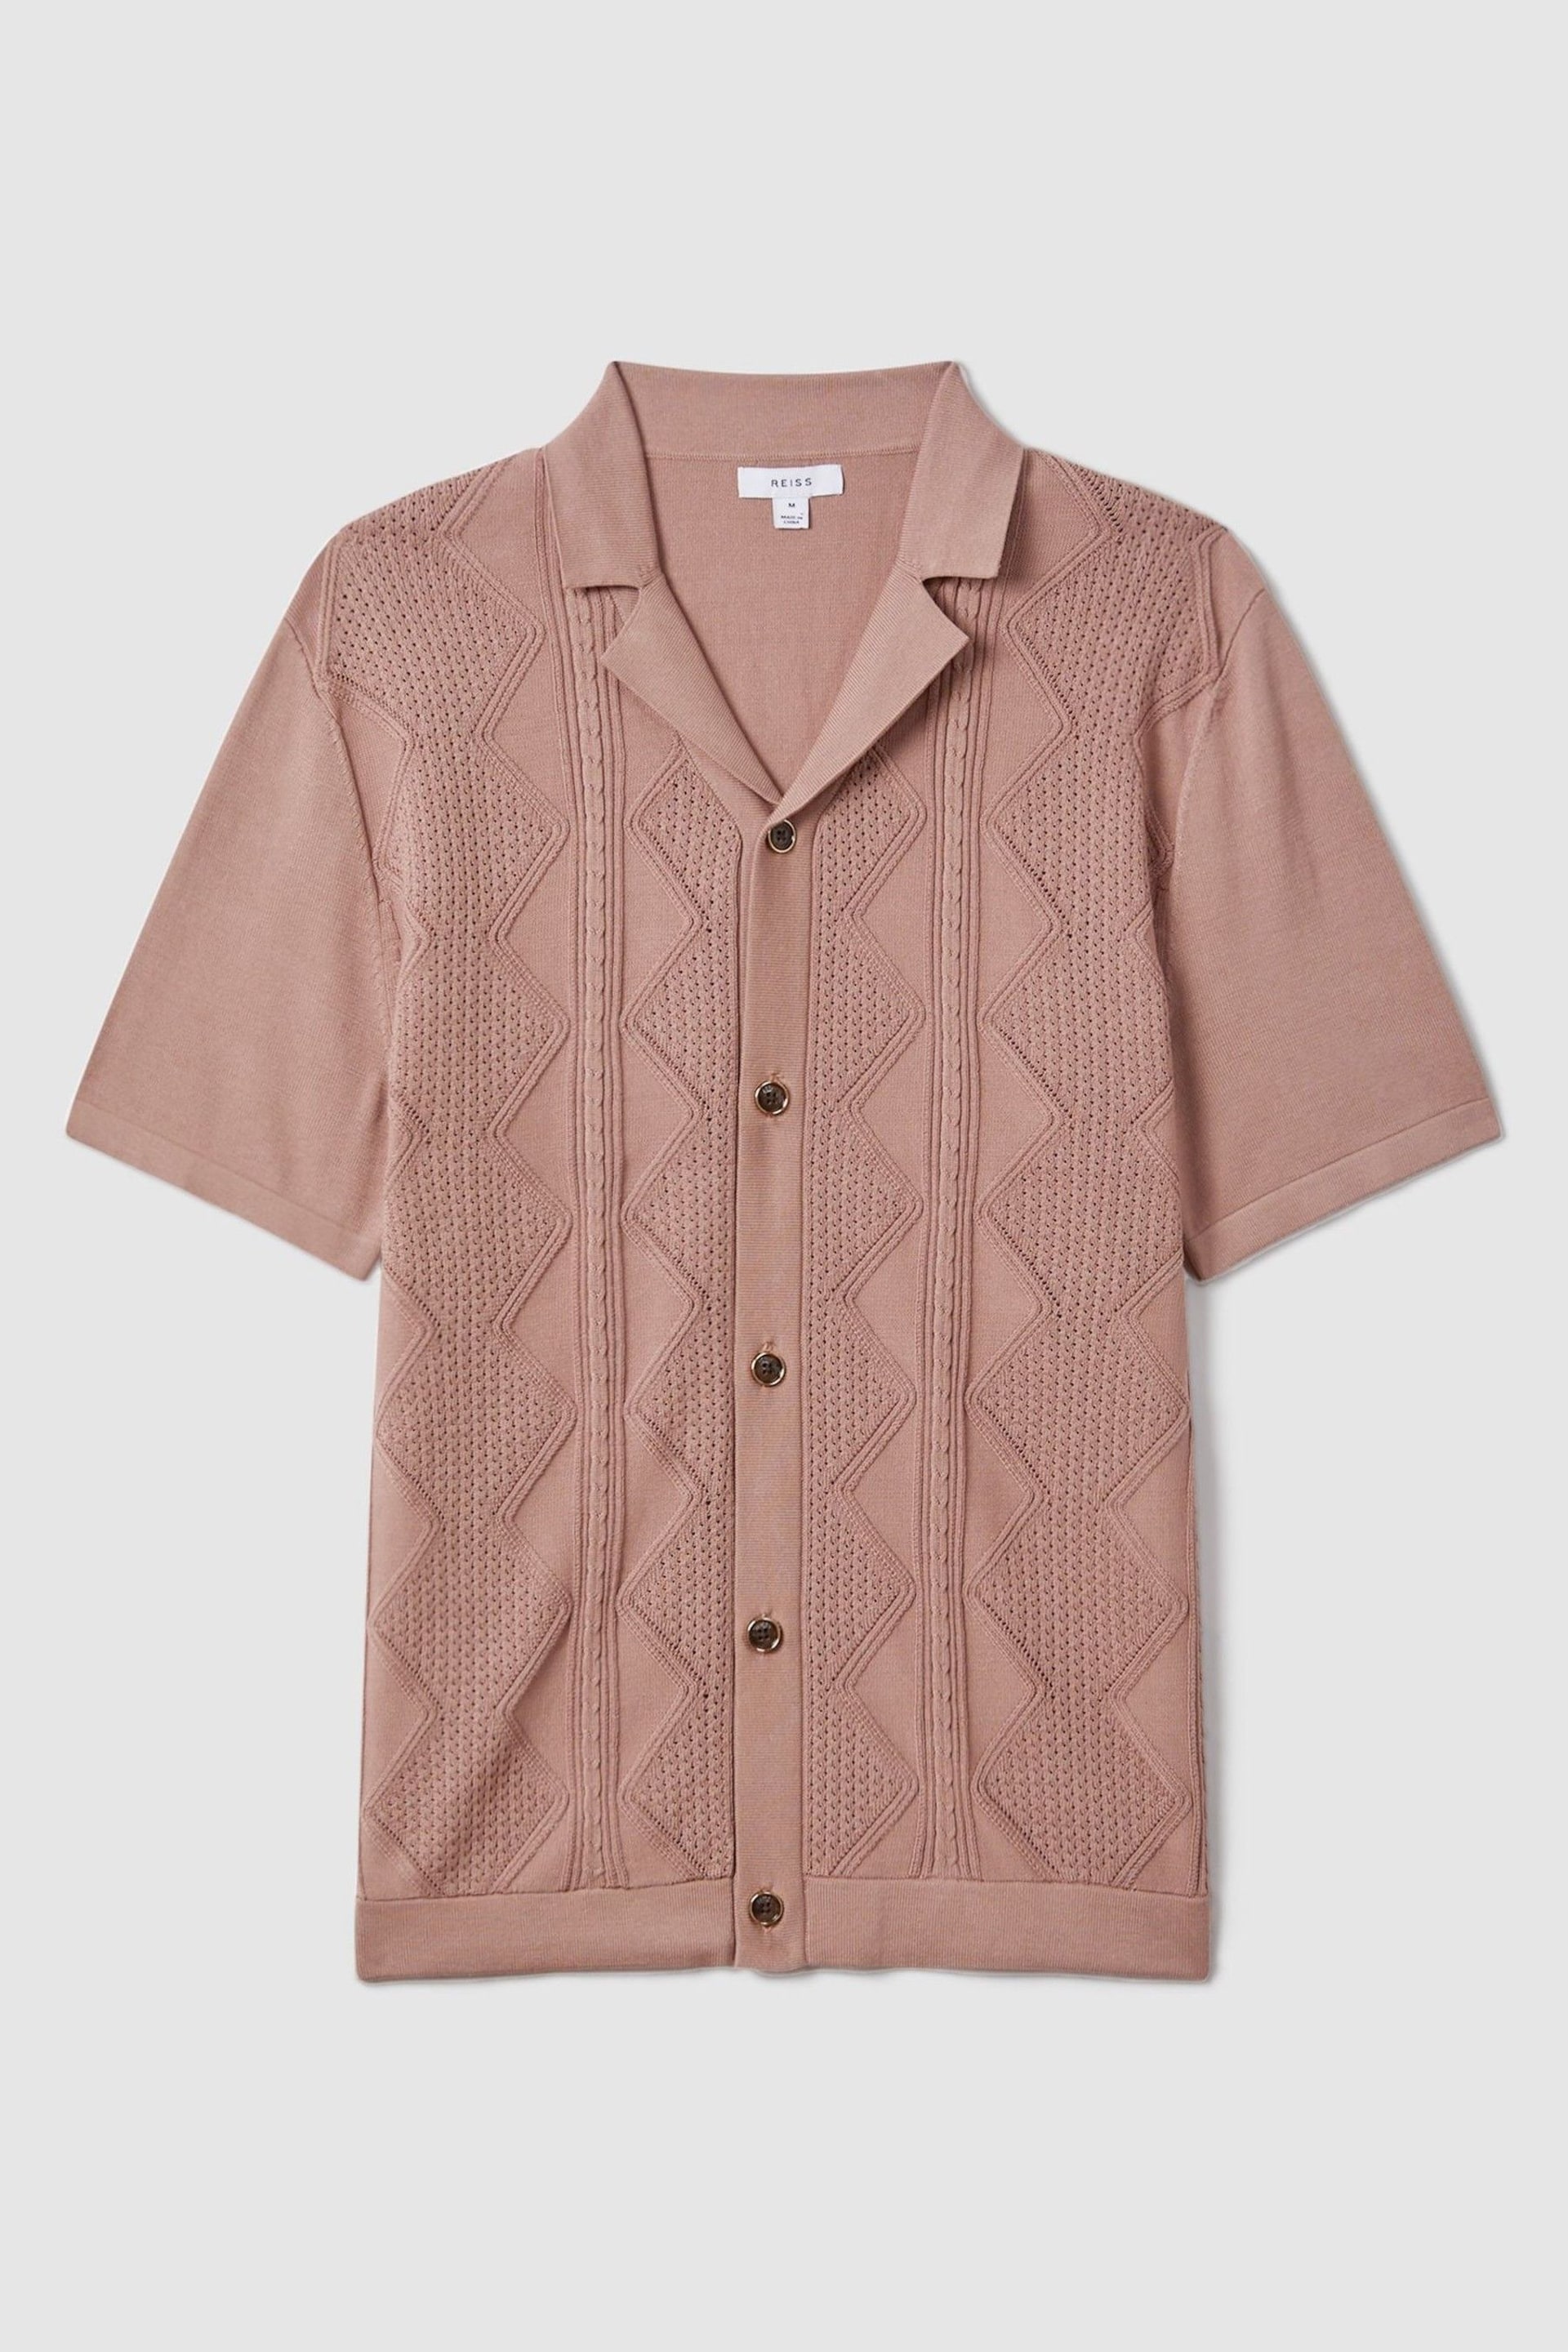 Reiss Rose Fortune Cable Knit Cuban Collar Shirt - Image 2 of 6